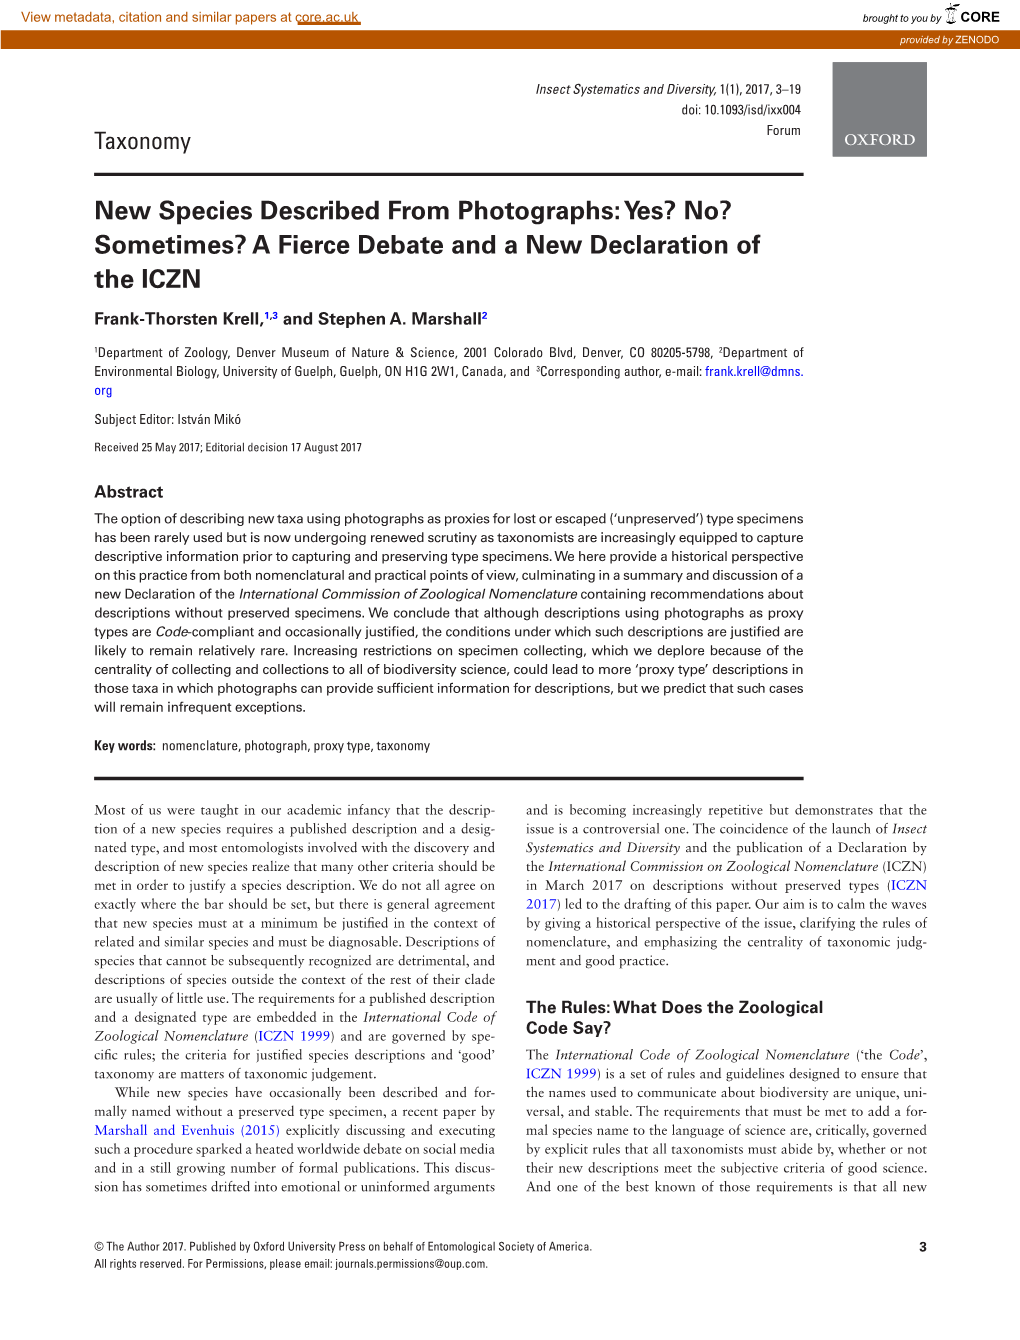 New Species Described from Photographs: Yes? No? Sometimes? a Fierce Debate and a New Declaration of the ICZN